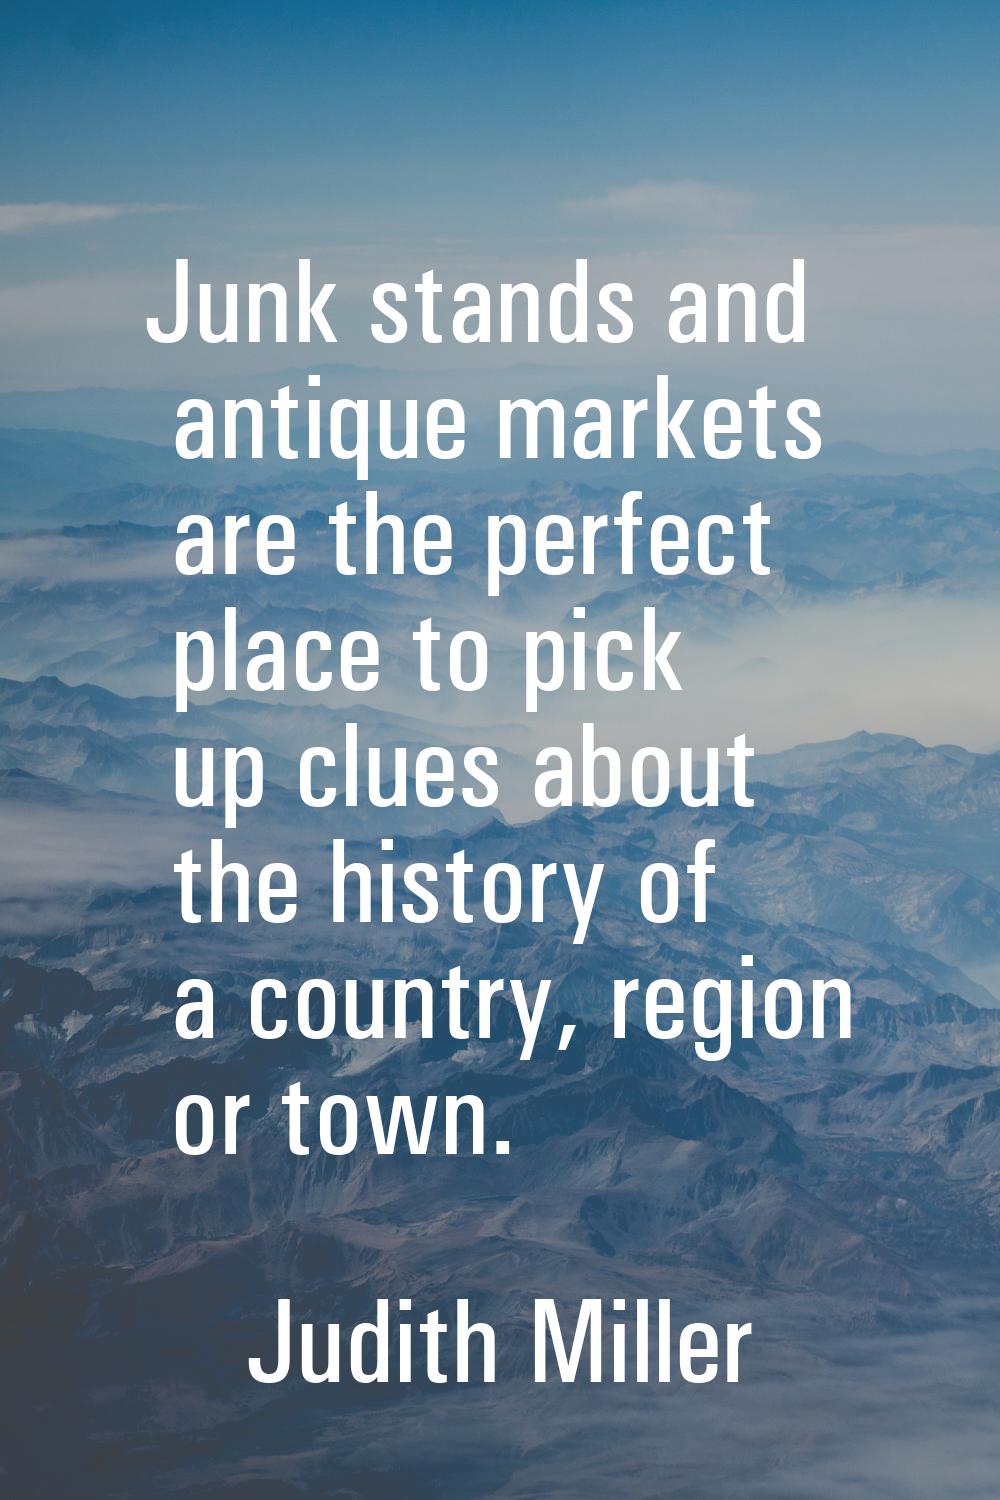 Junk stands and antique markets are the perfect place to pick up clues about the history of a count